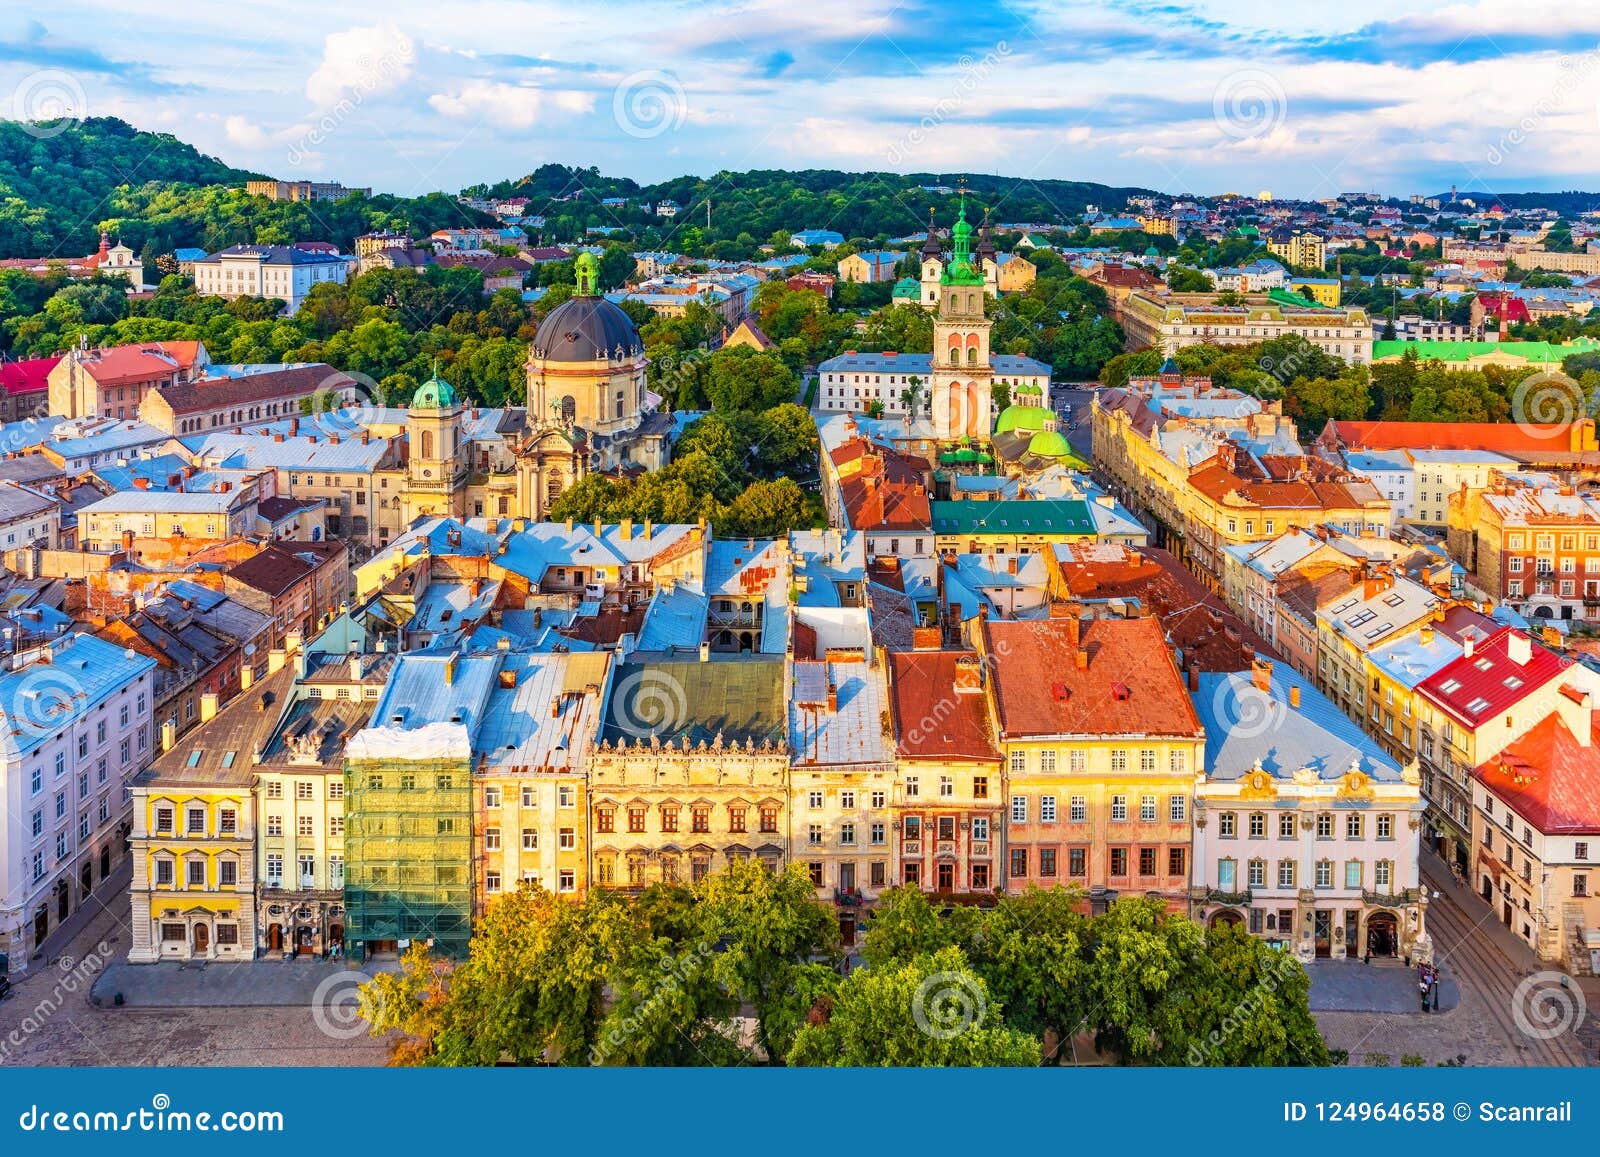 aerial view of the old town of lviv, ukraine